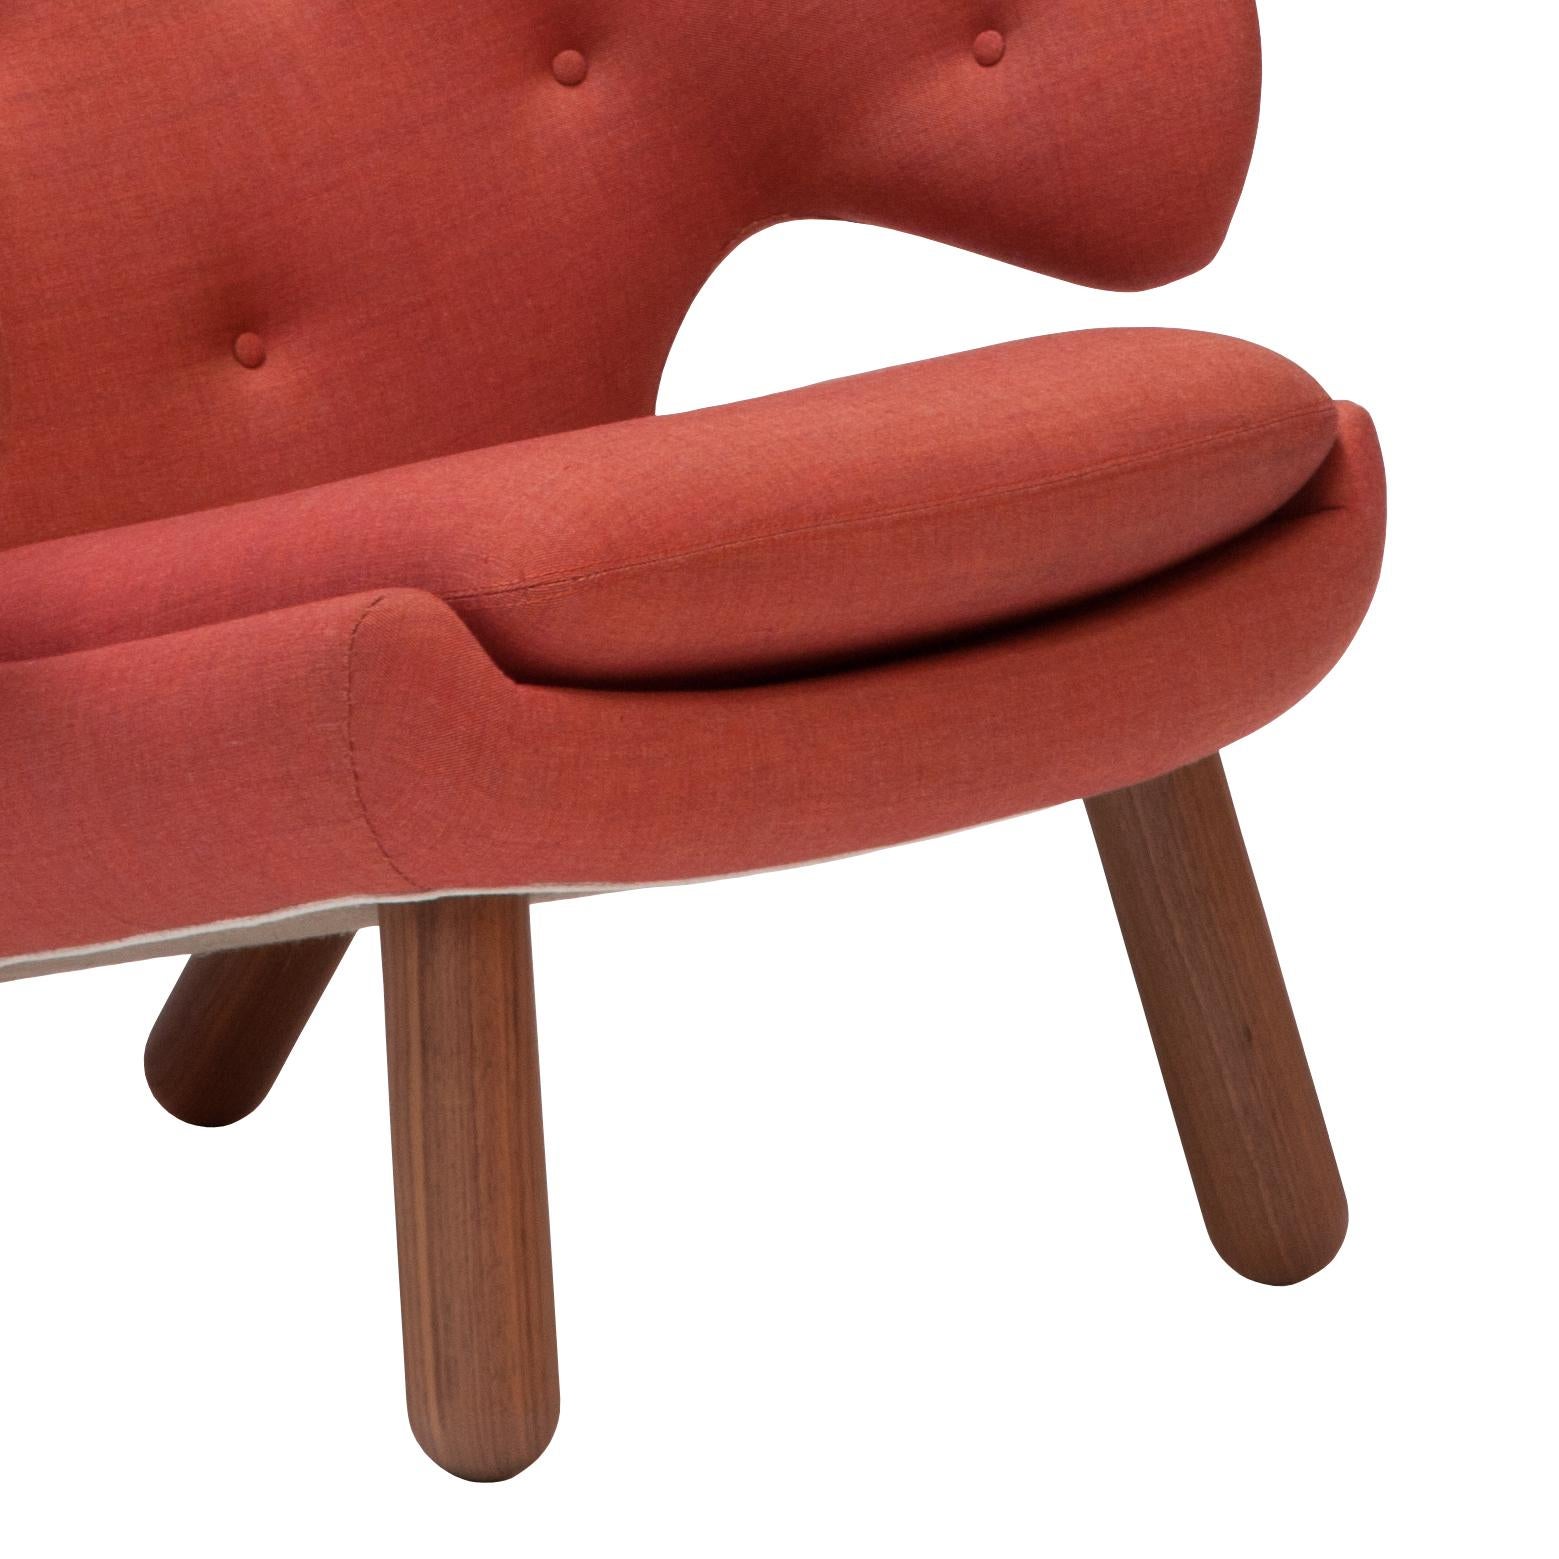 Contemporary Set of Two Pelican Chairs Upholstered in Red Kvadrat Remix Fabric by Finn Juhl